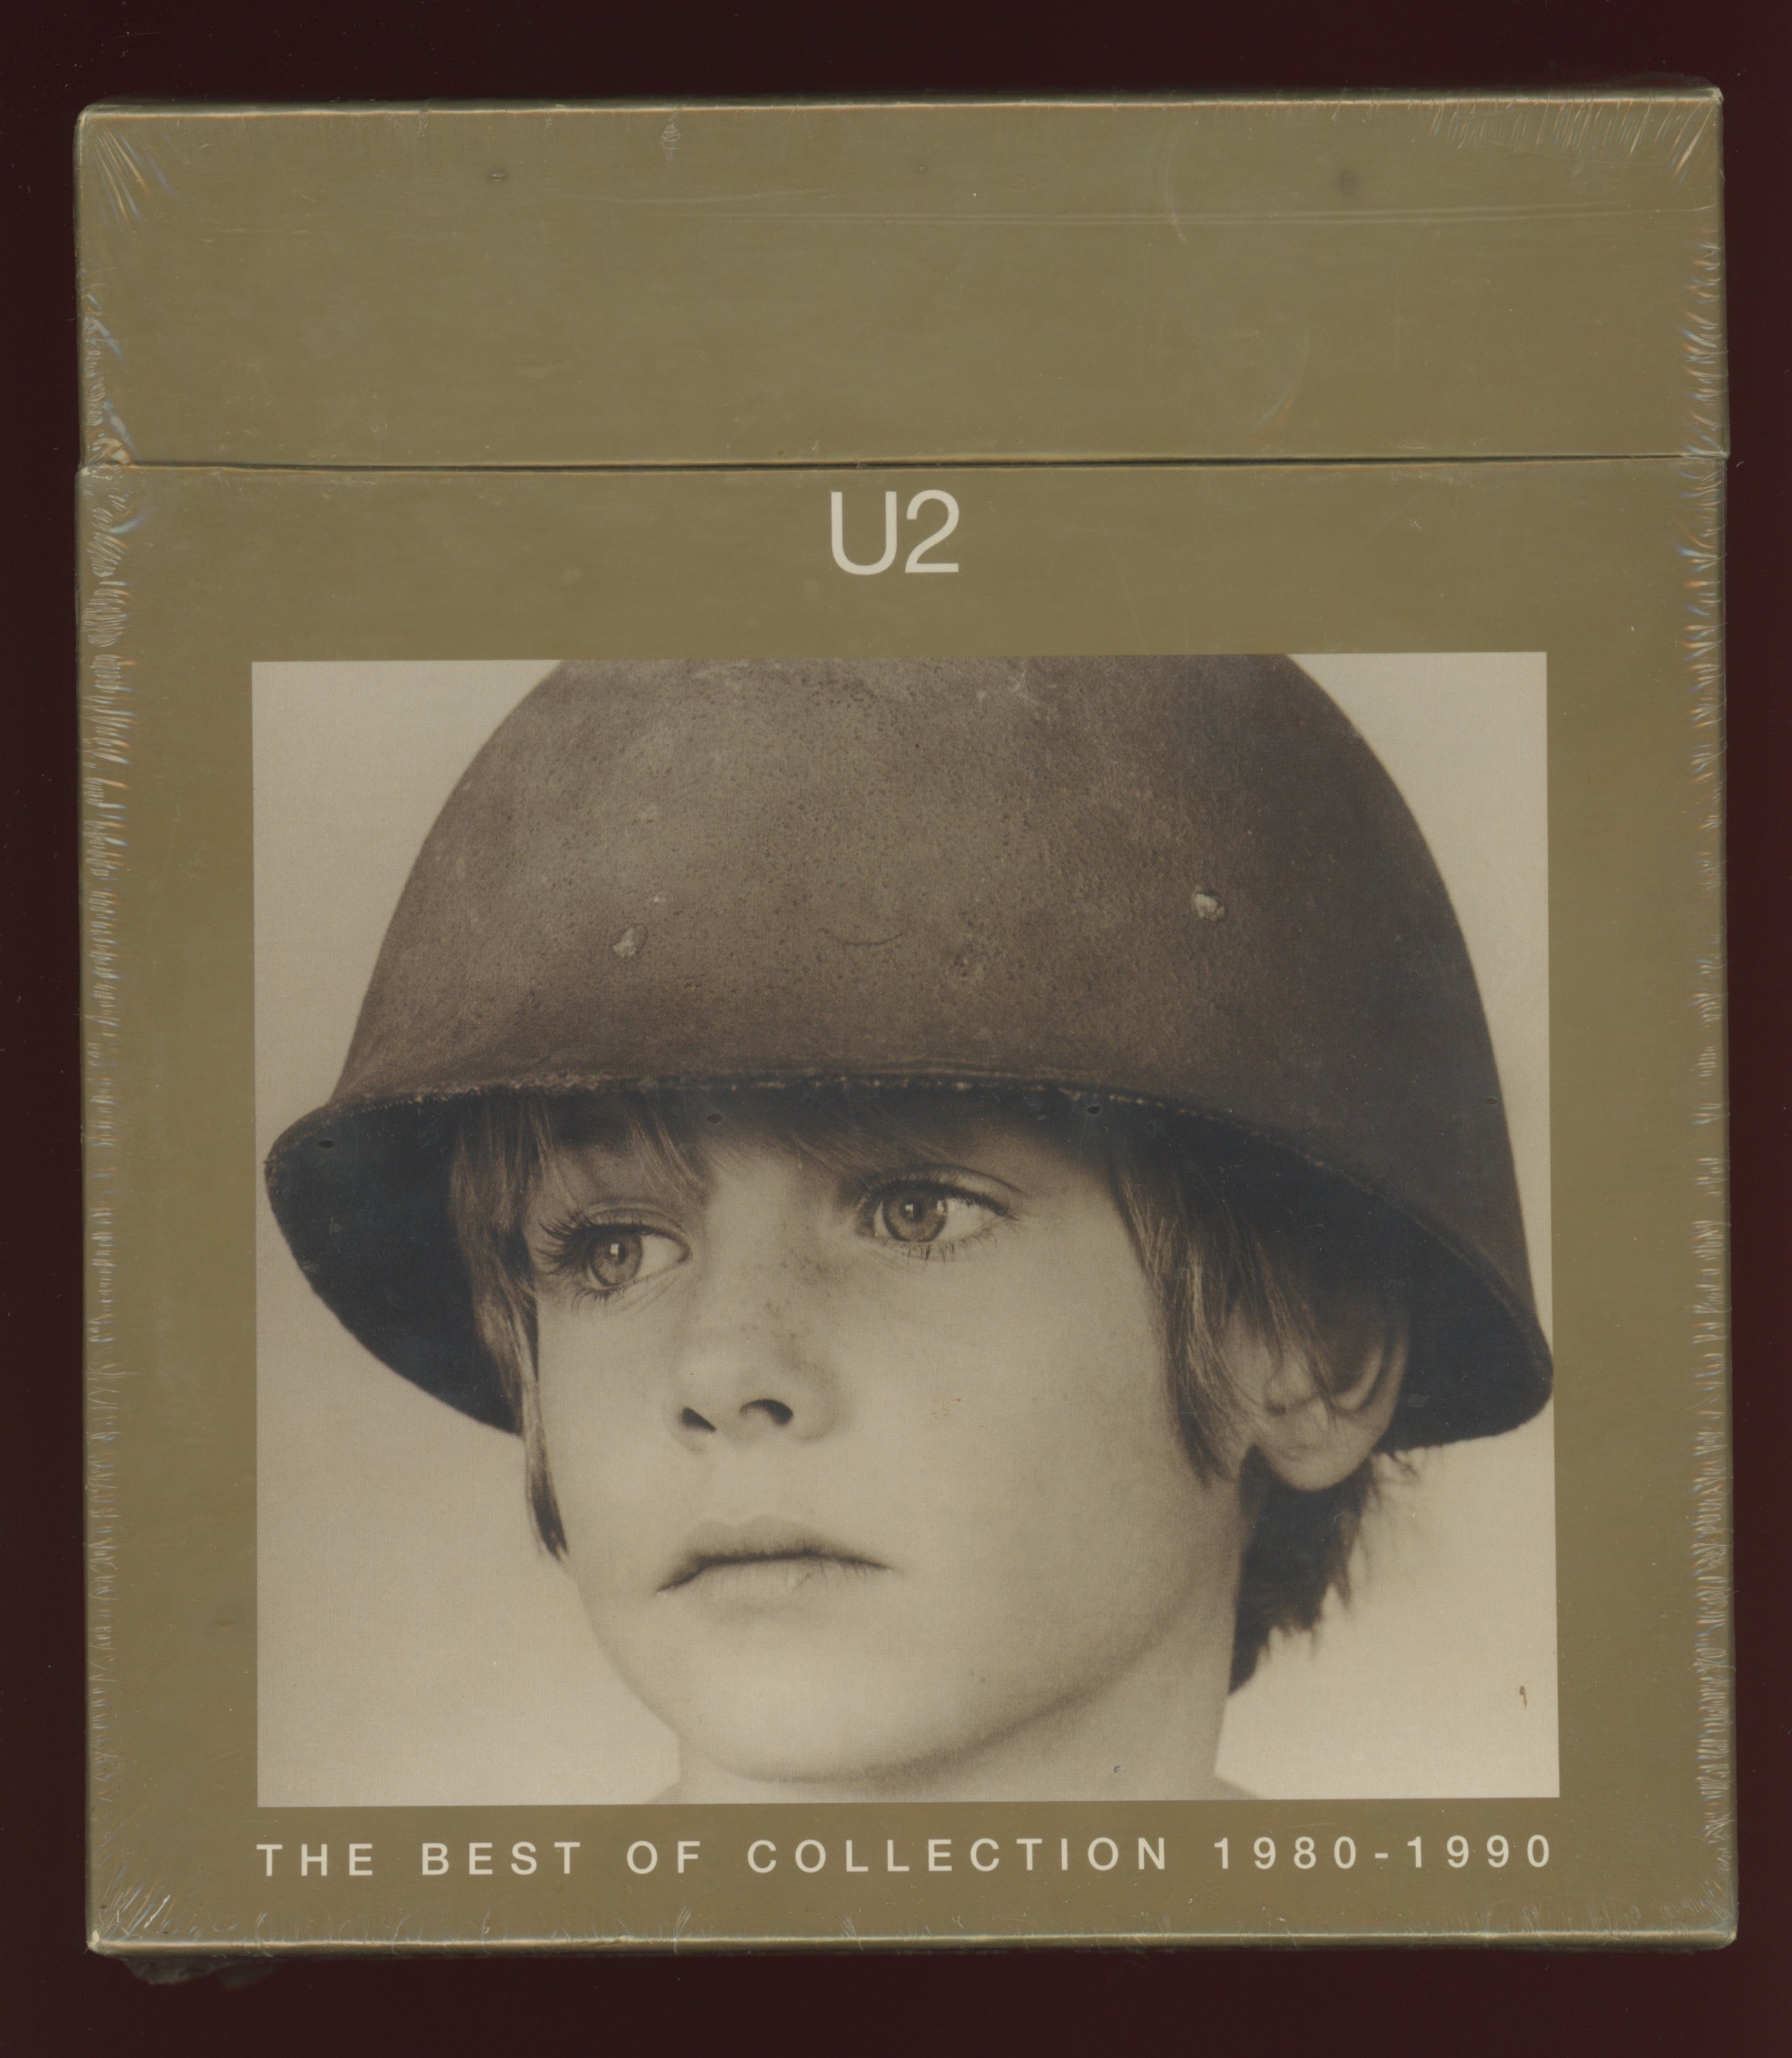 U2 - The Best Of Collection 1980-1990 on Island Promo Box Set Sealed